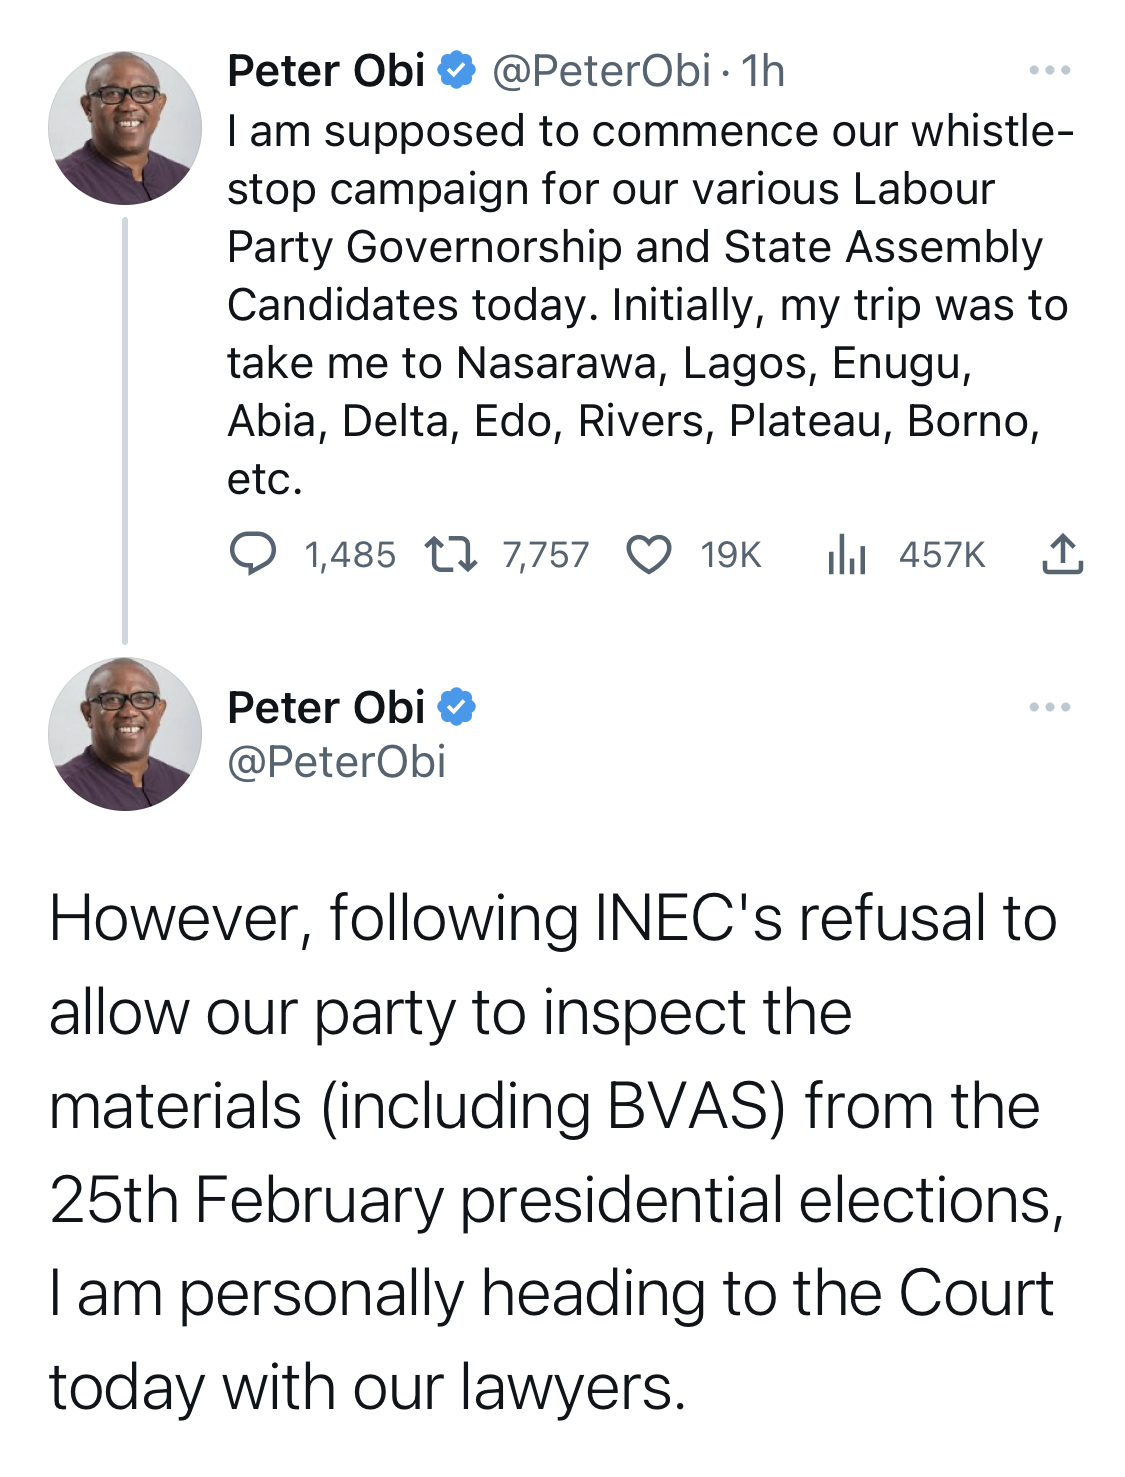 I will be going to court by myself since INEC wants to deny me access - Peter Obi Declares